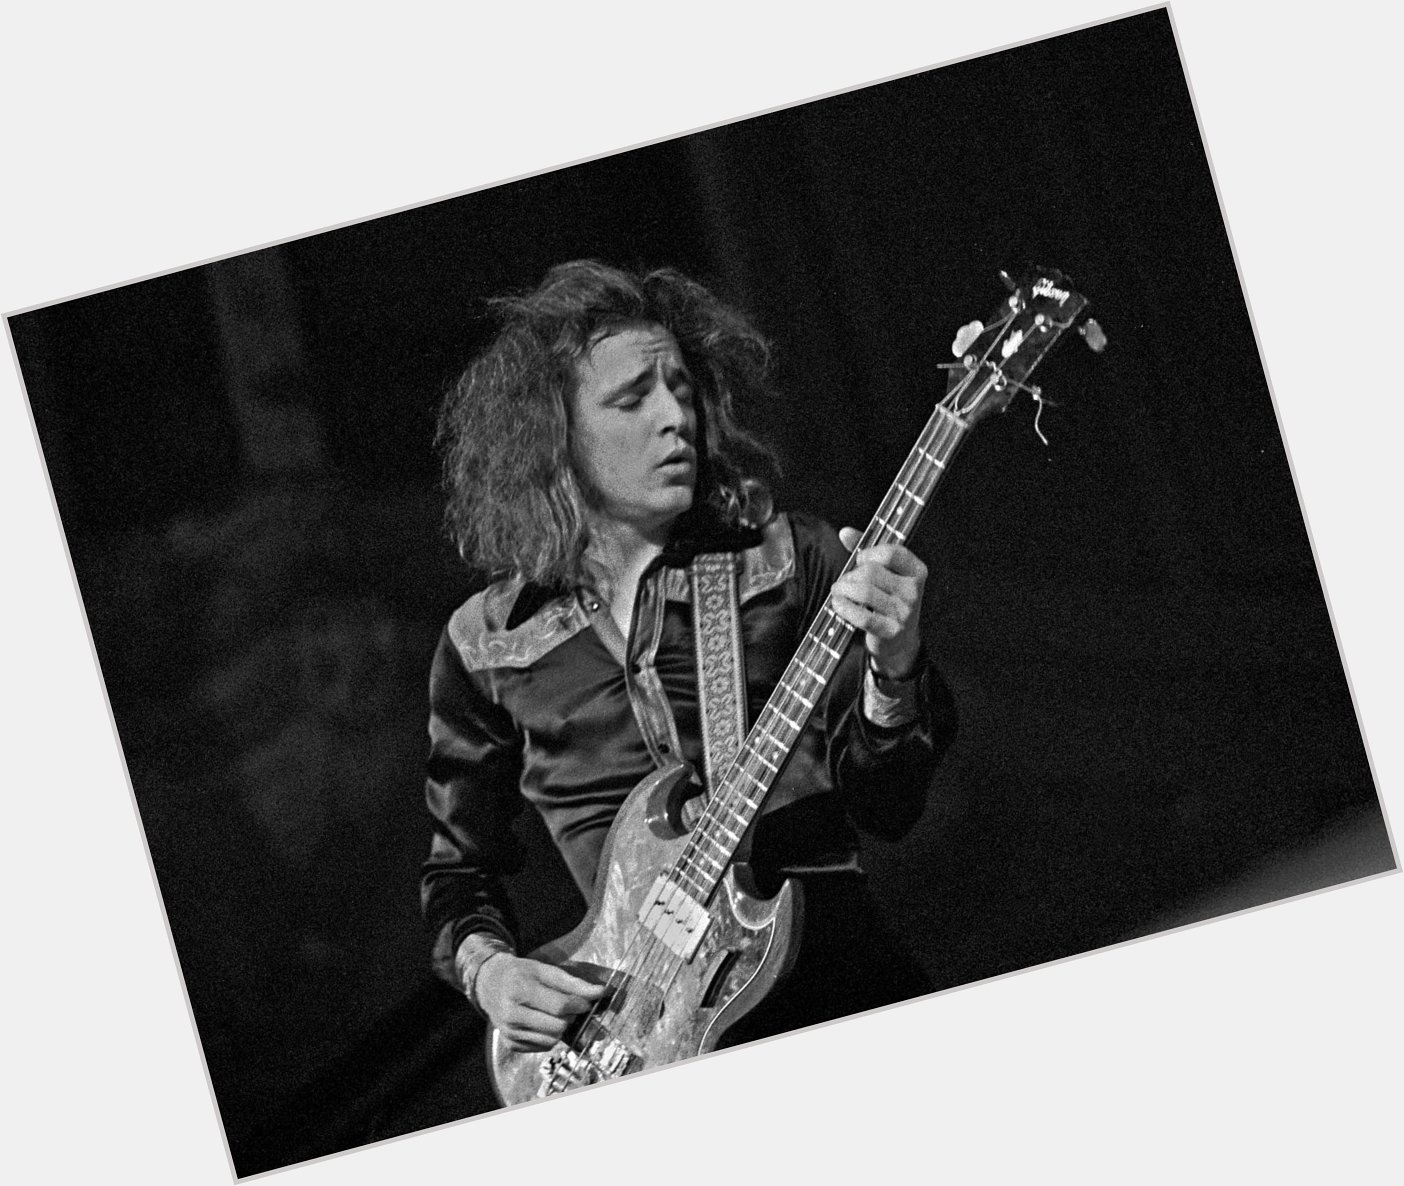 Happy birthday to Cream bassist, Jack Bruce! He would have been 76 today. 